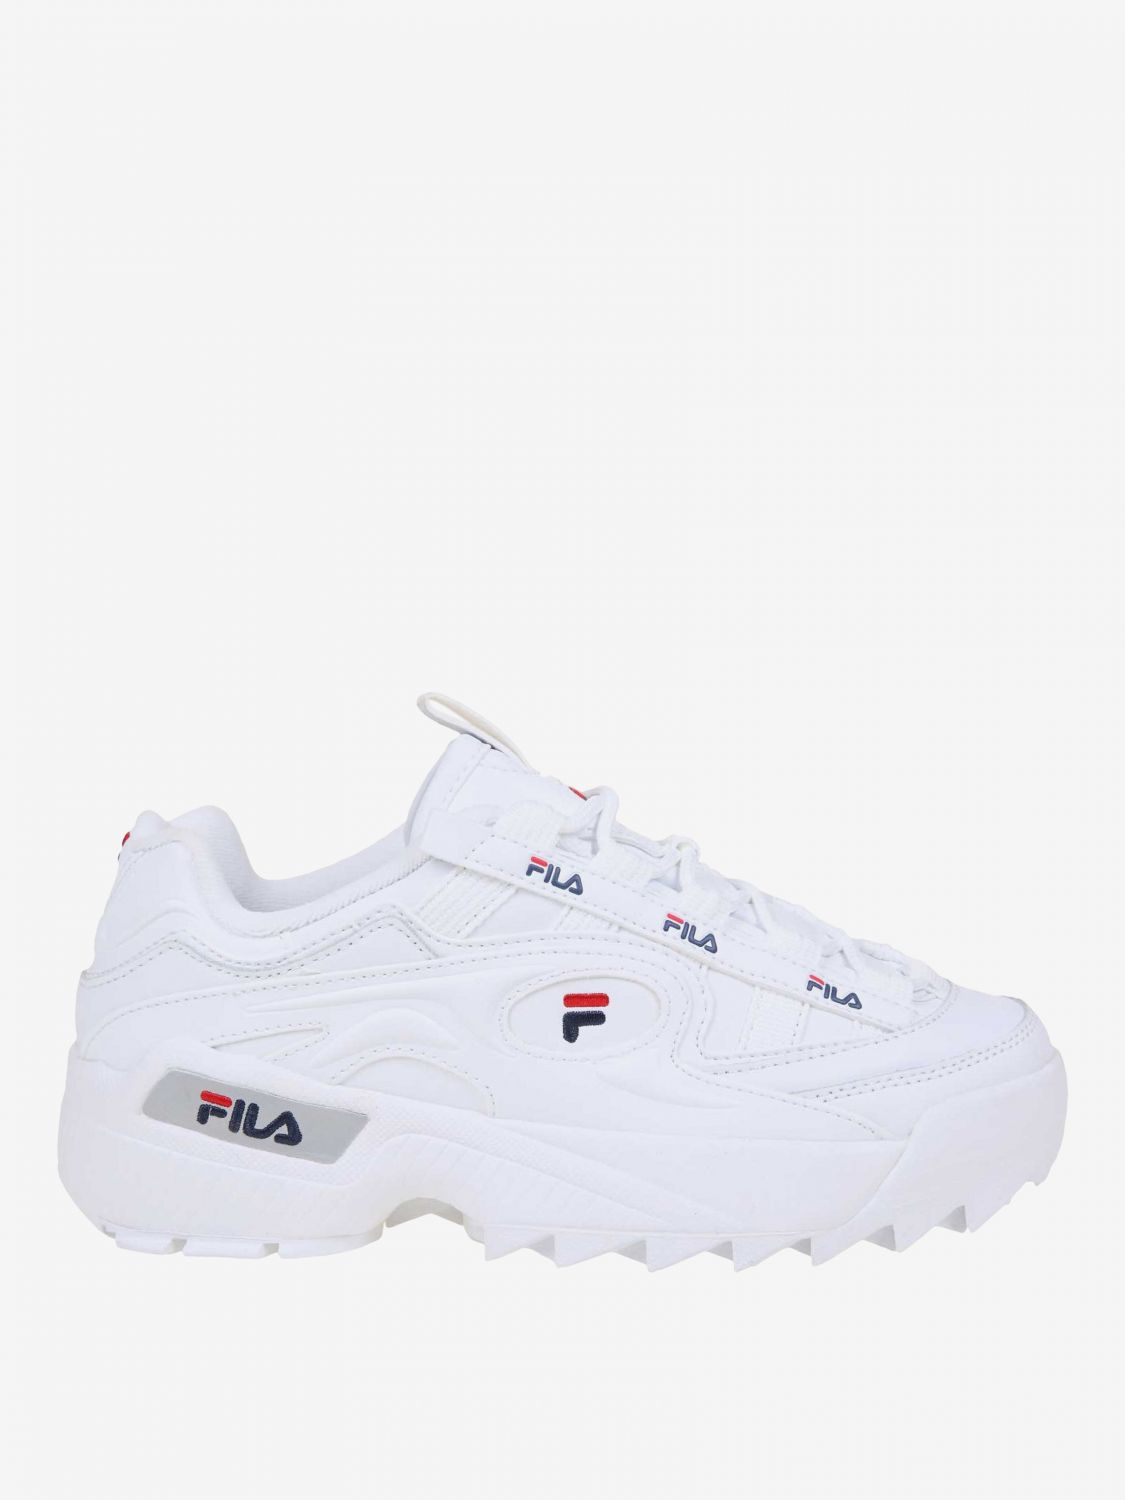 fila shoes womens uk Cheaper Than Price> Buy Clothing, Accessories and lifestyle products for women & men -